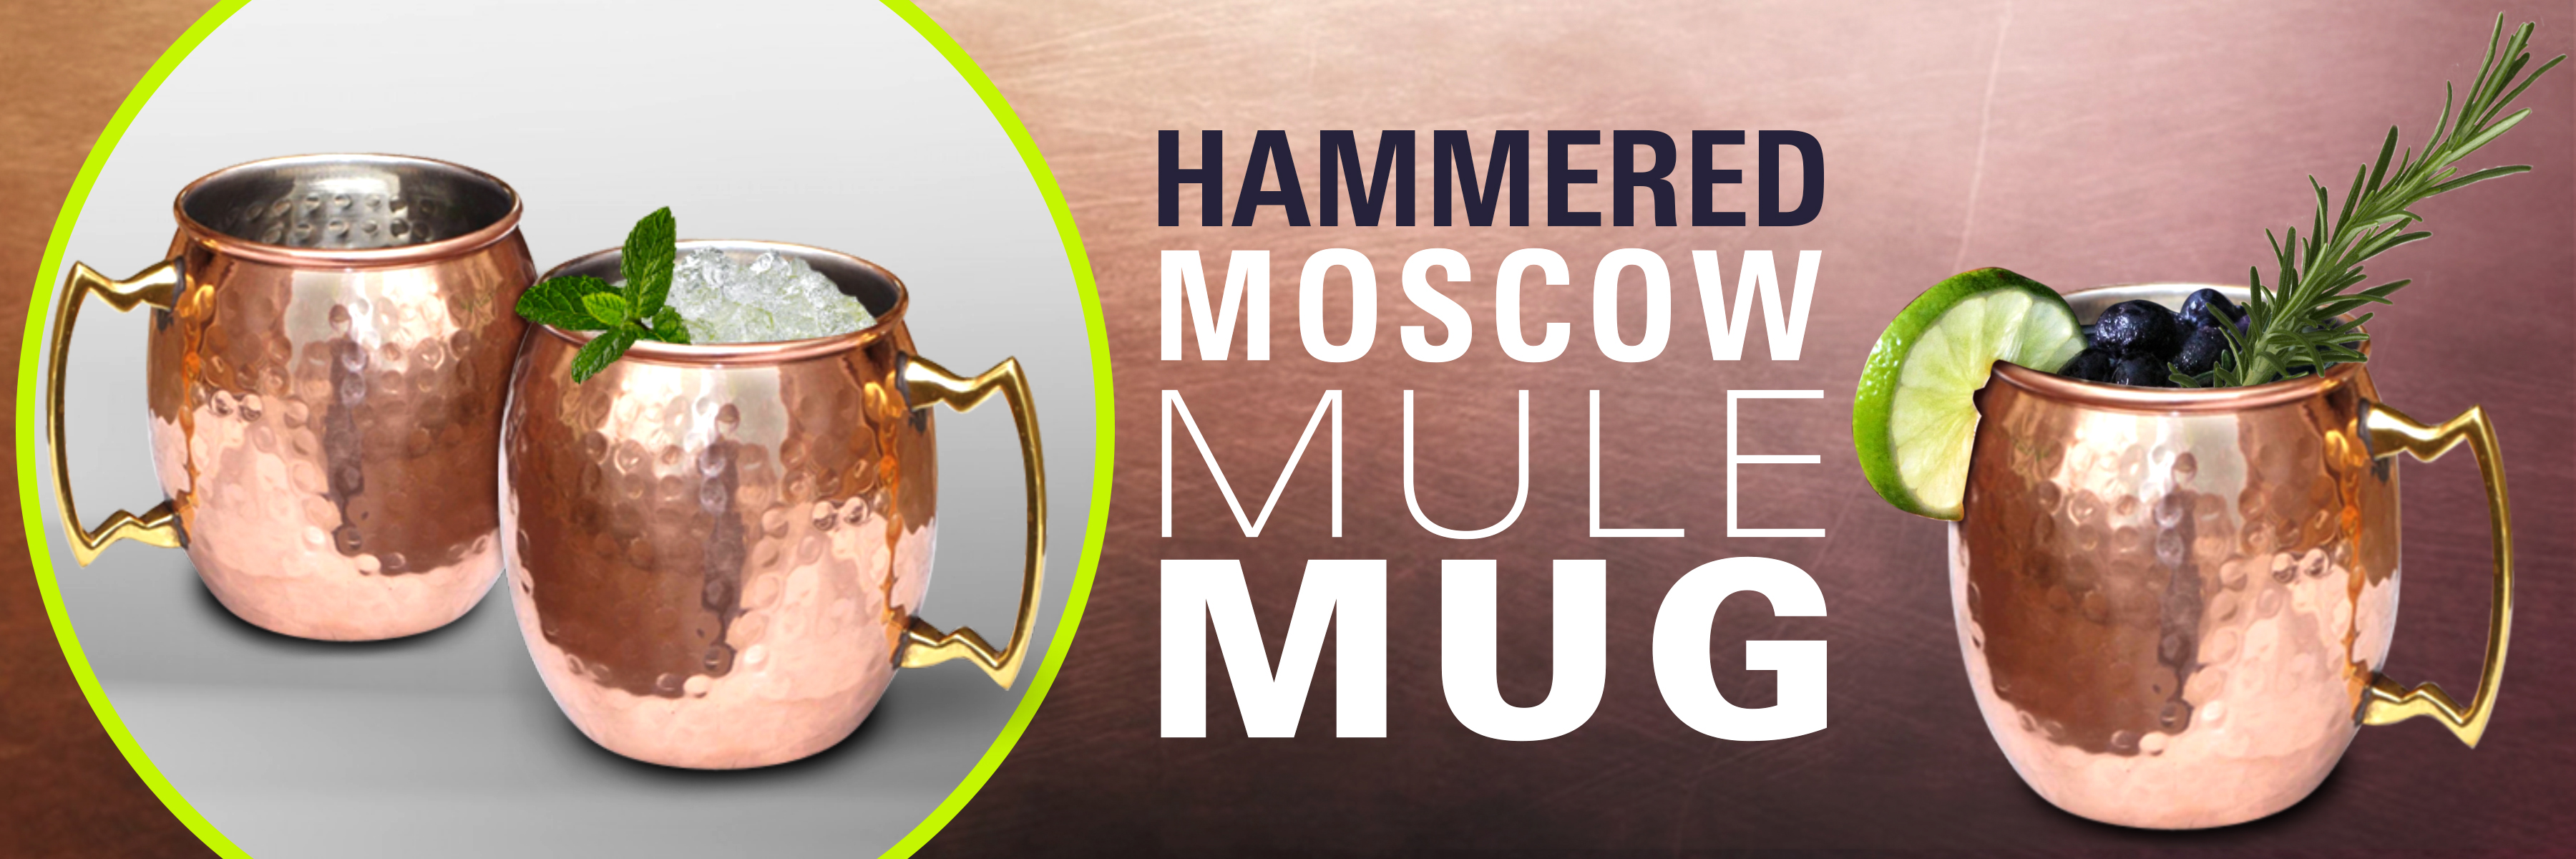 hammered moscow mule